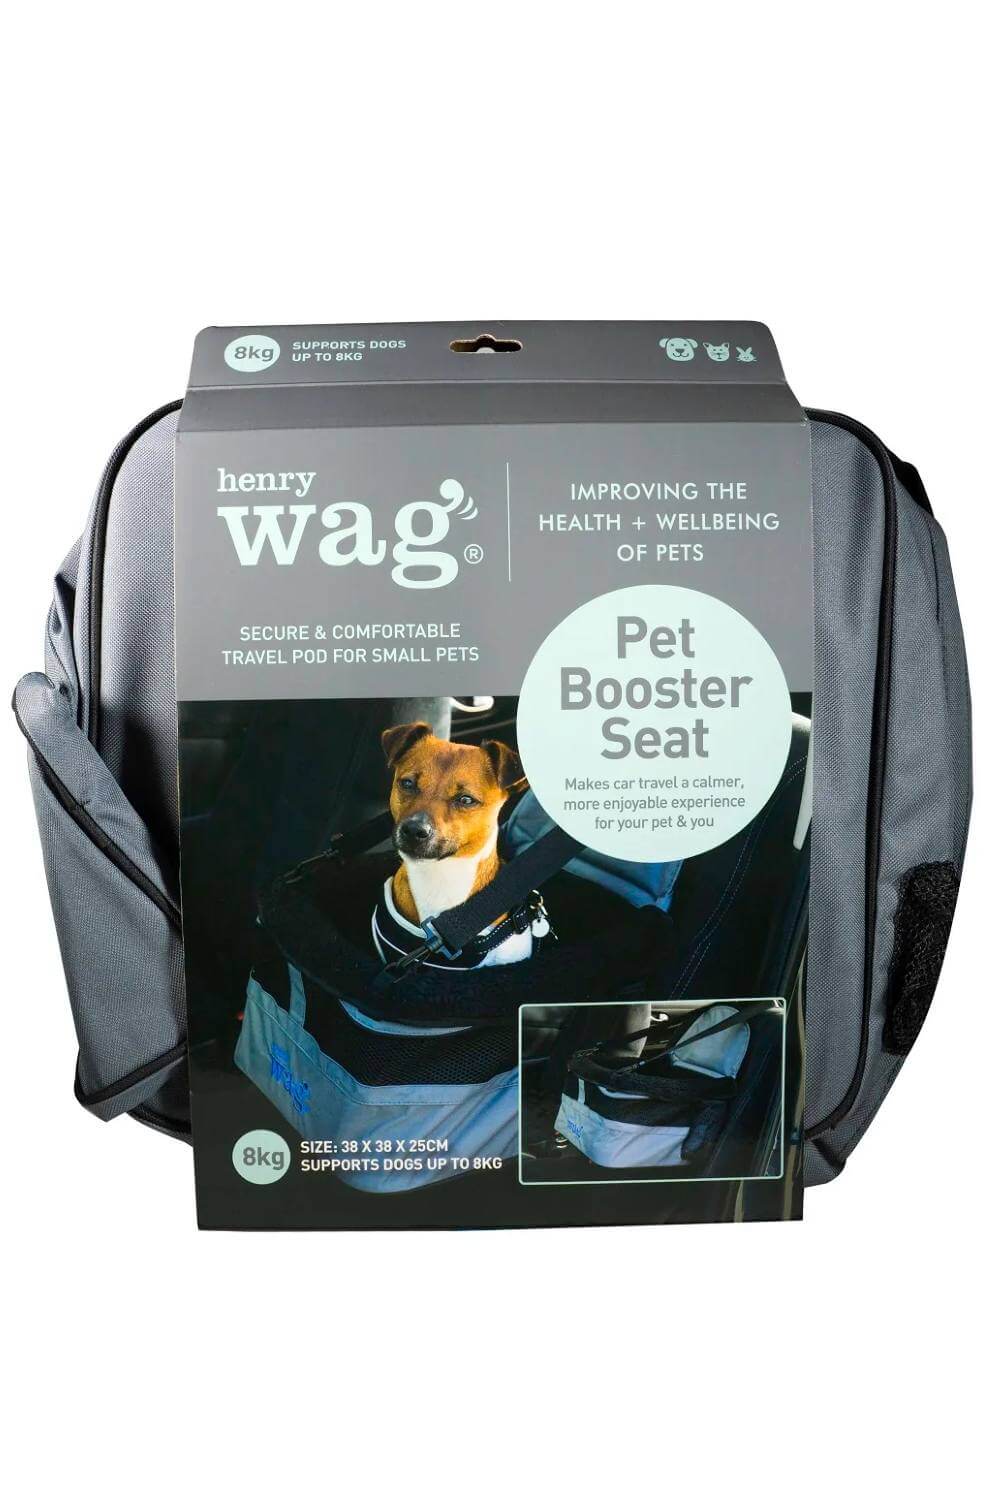 Henry Wag Car Booster Seat In Grey/Black